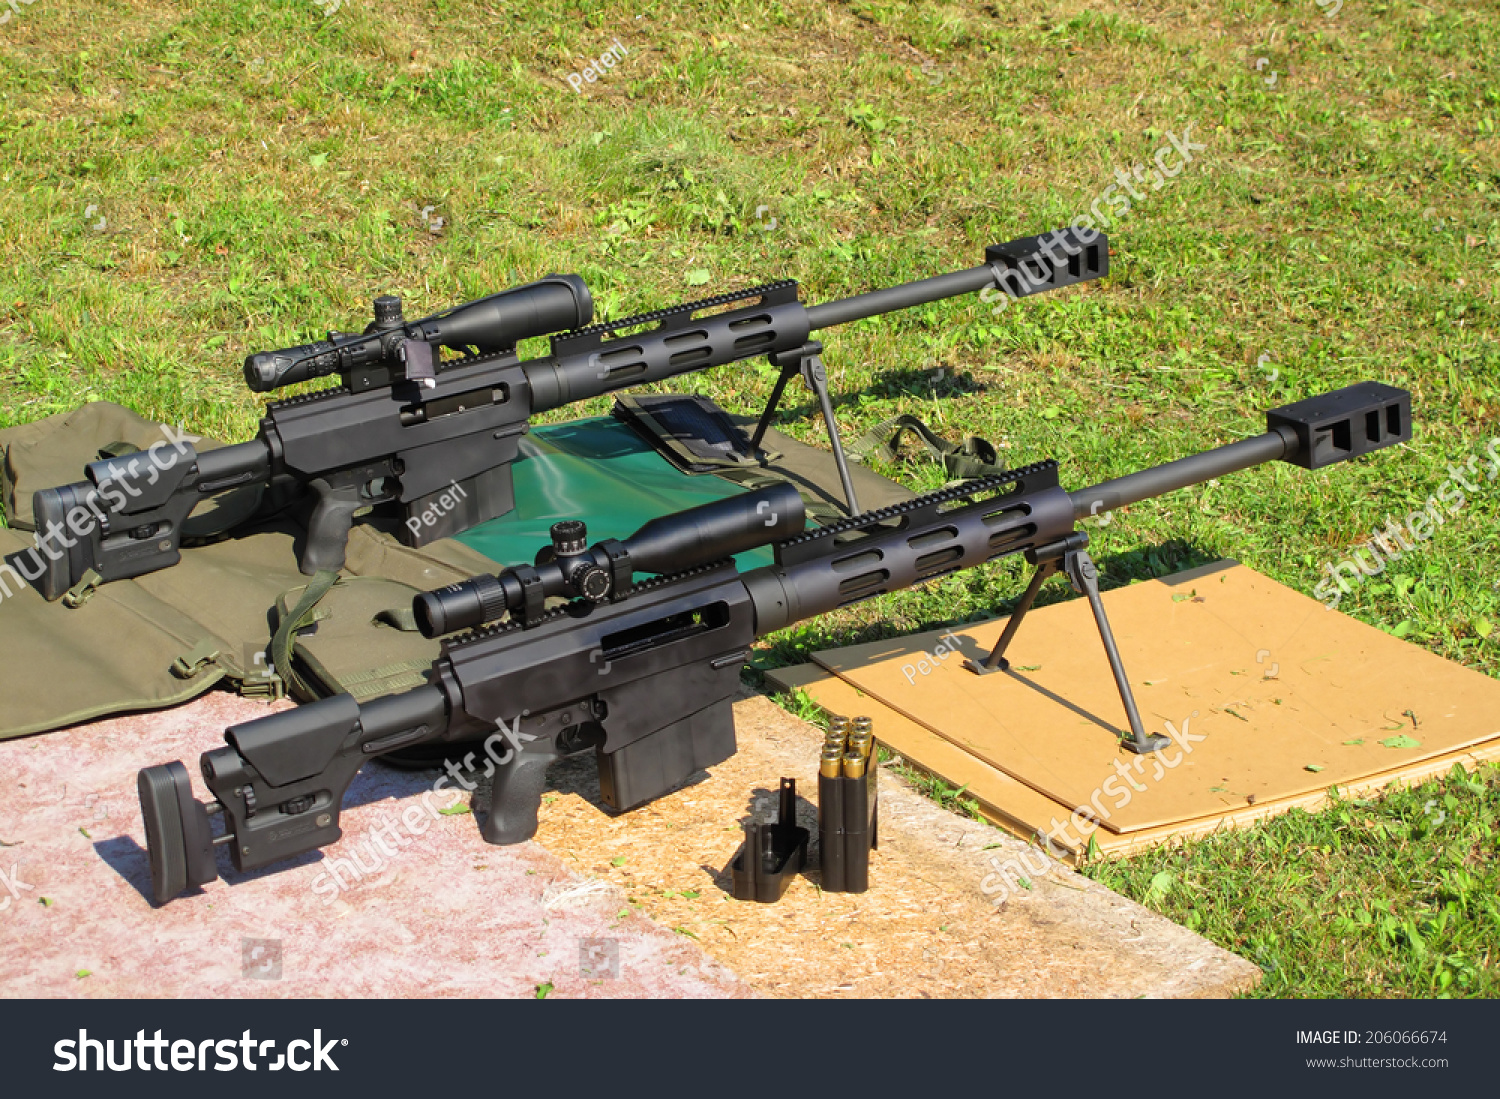 Two Sniper Rifles 50 Bmg Caliber Stock Photo Edit Now